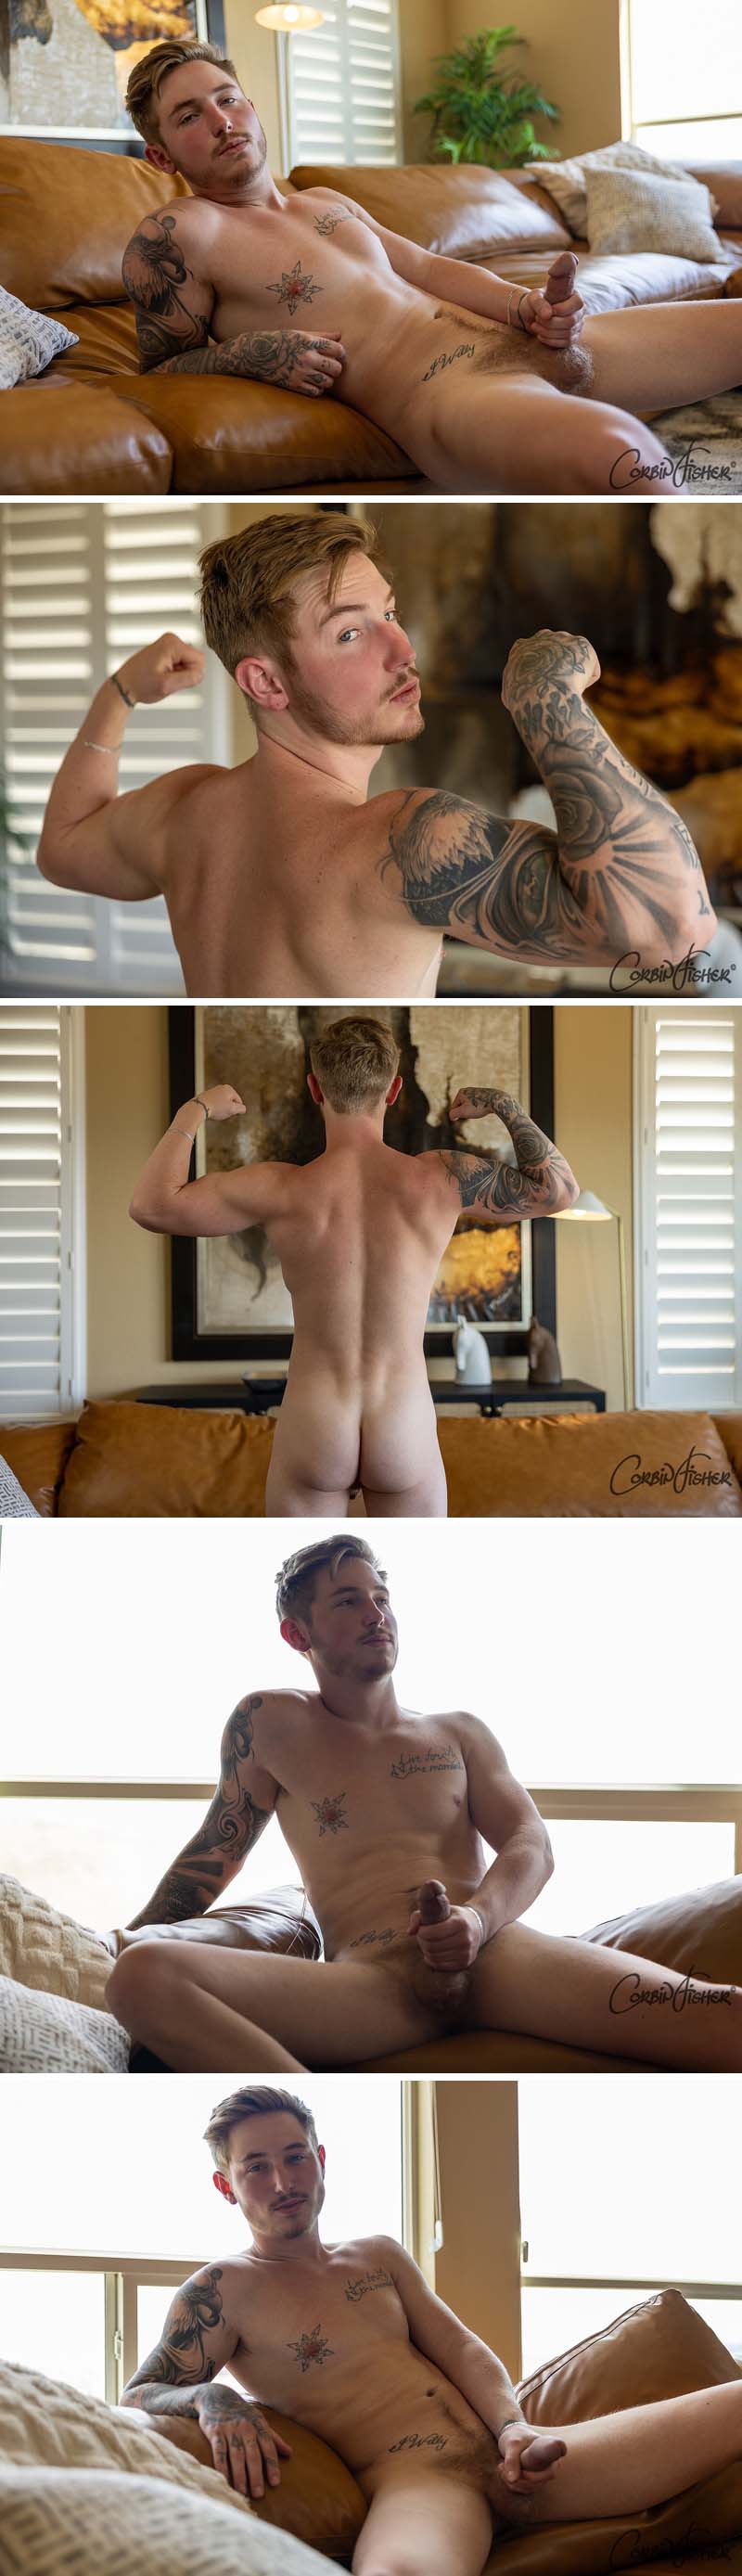 Ben Shows Off at CorbinFisher